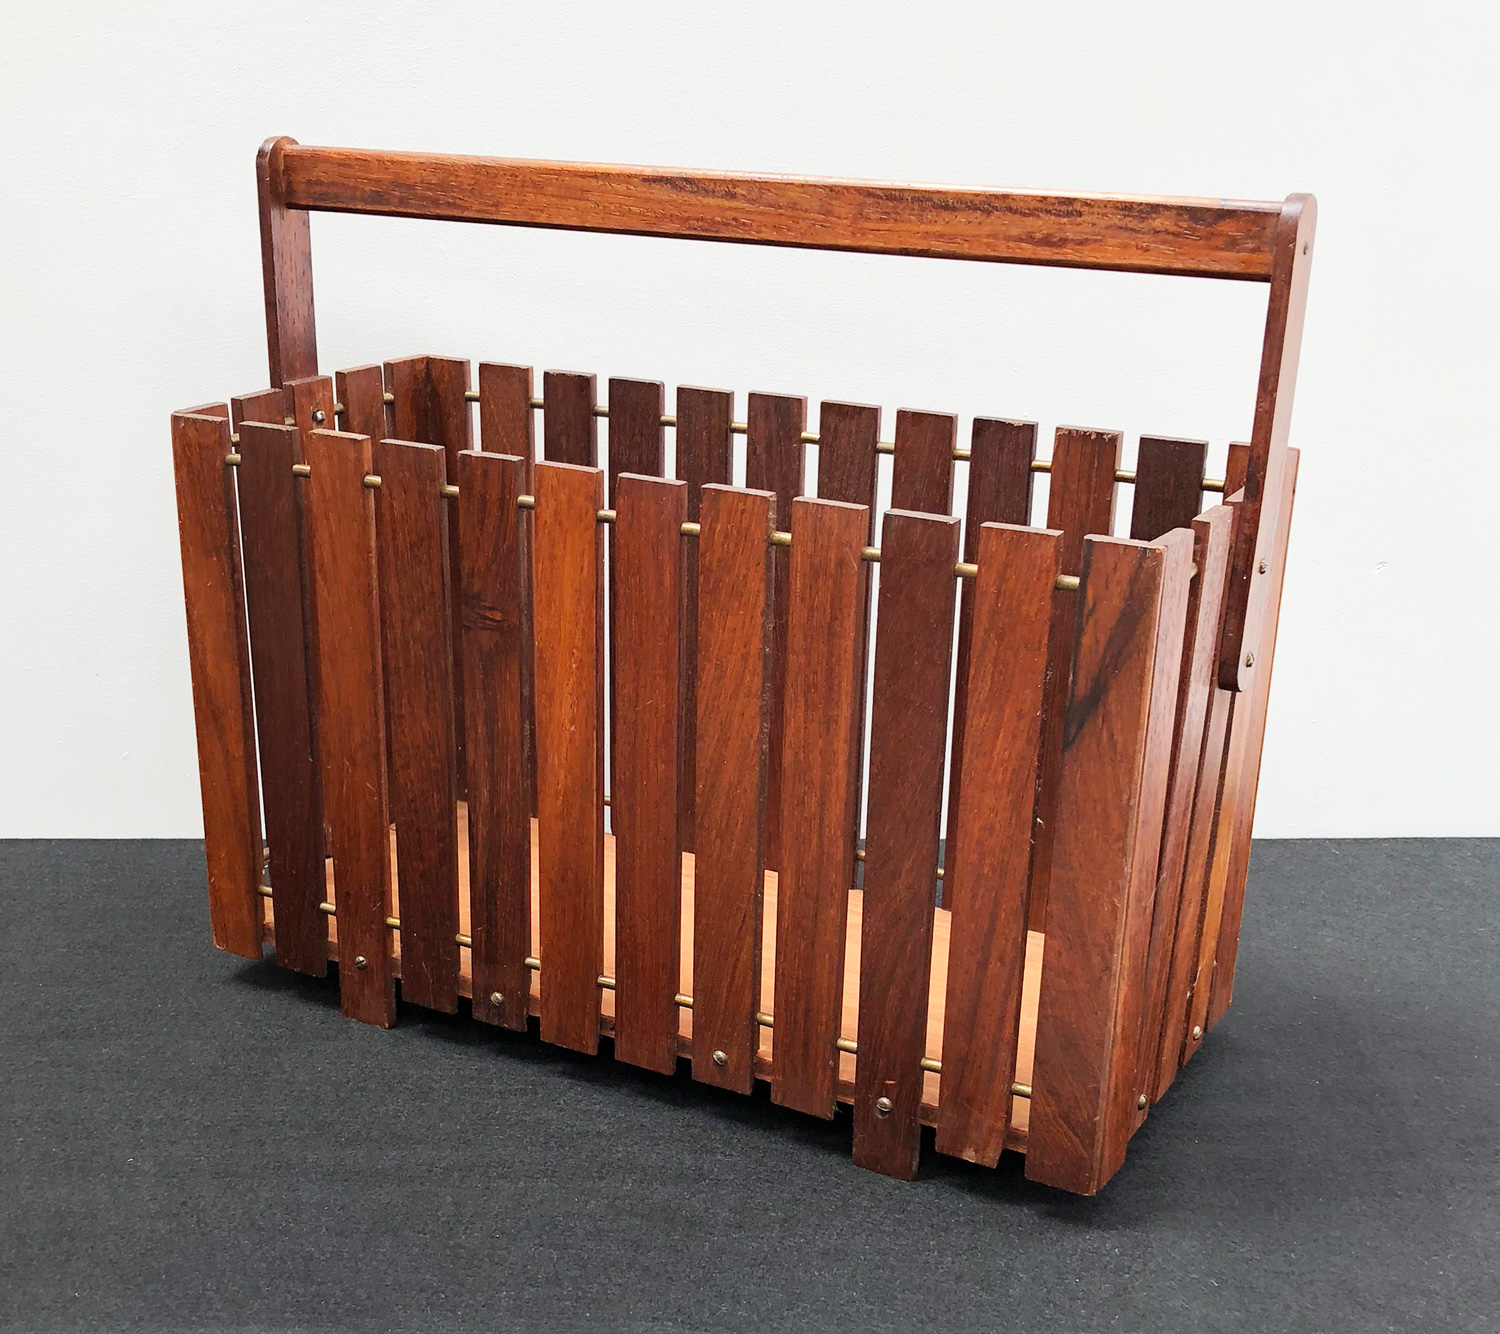 1960s Rosewood Magazine Rack by Gladlyn Ware